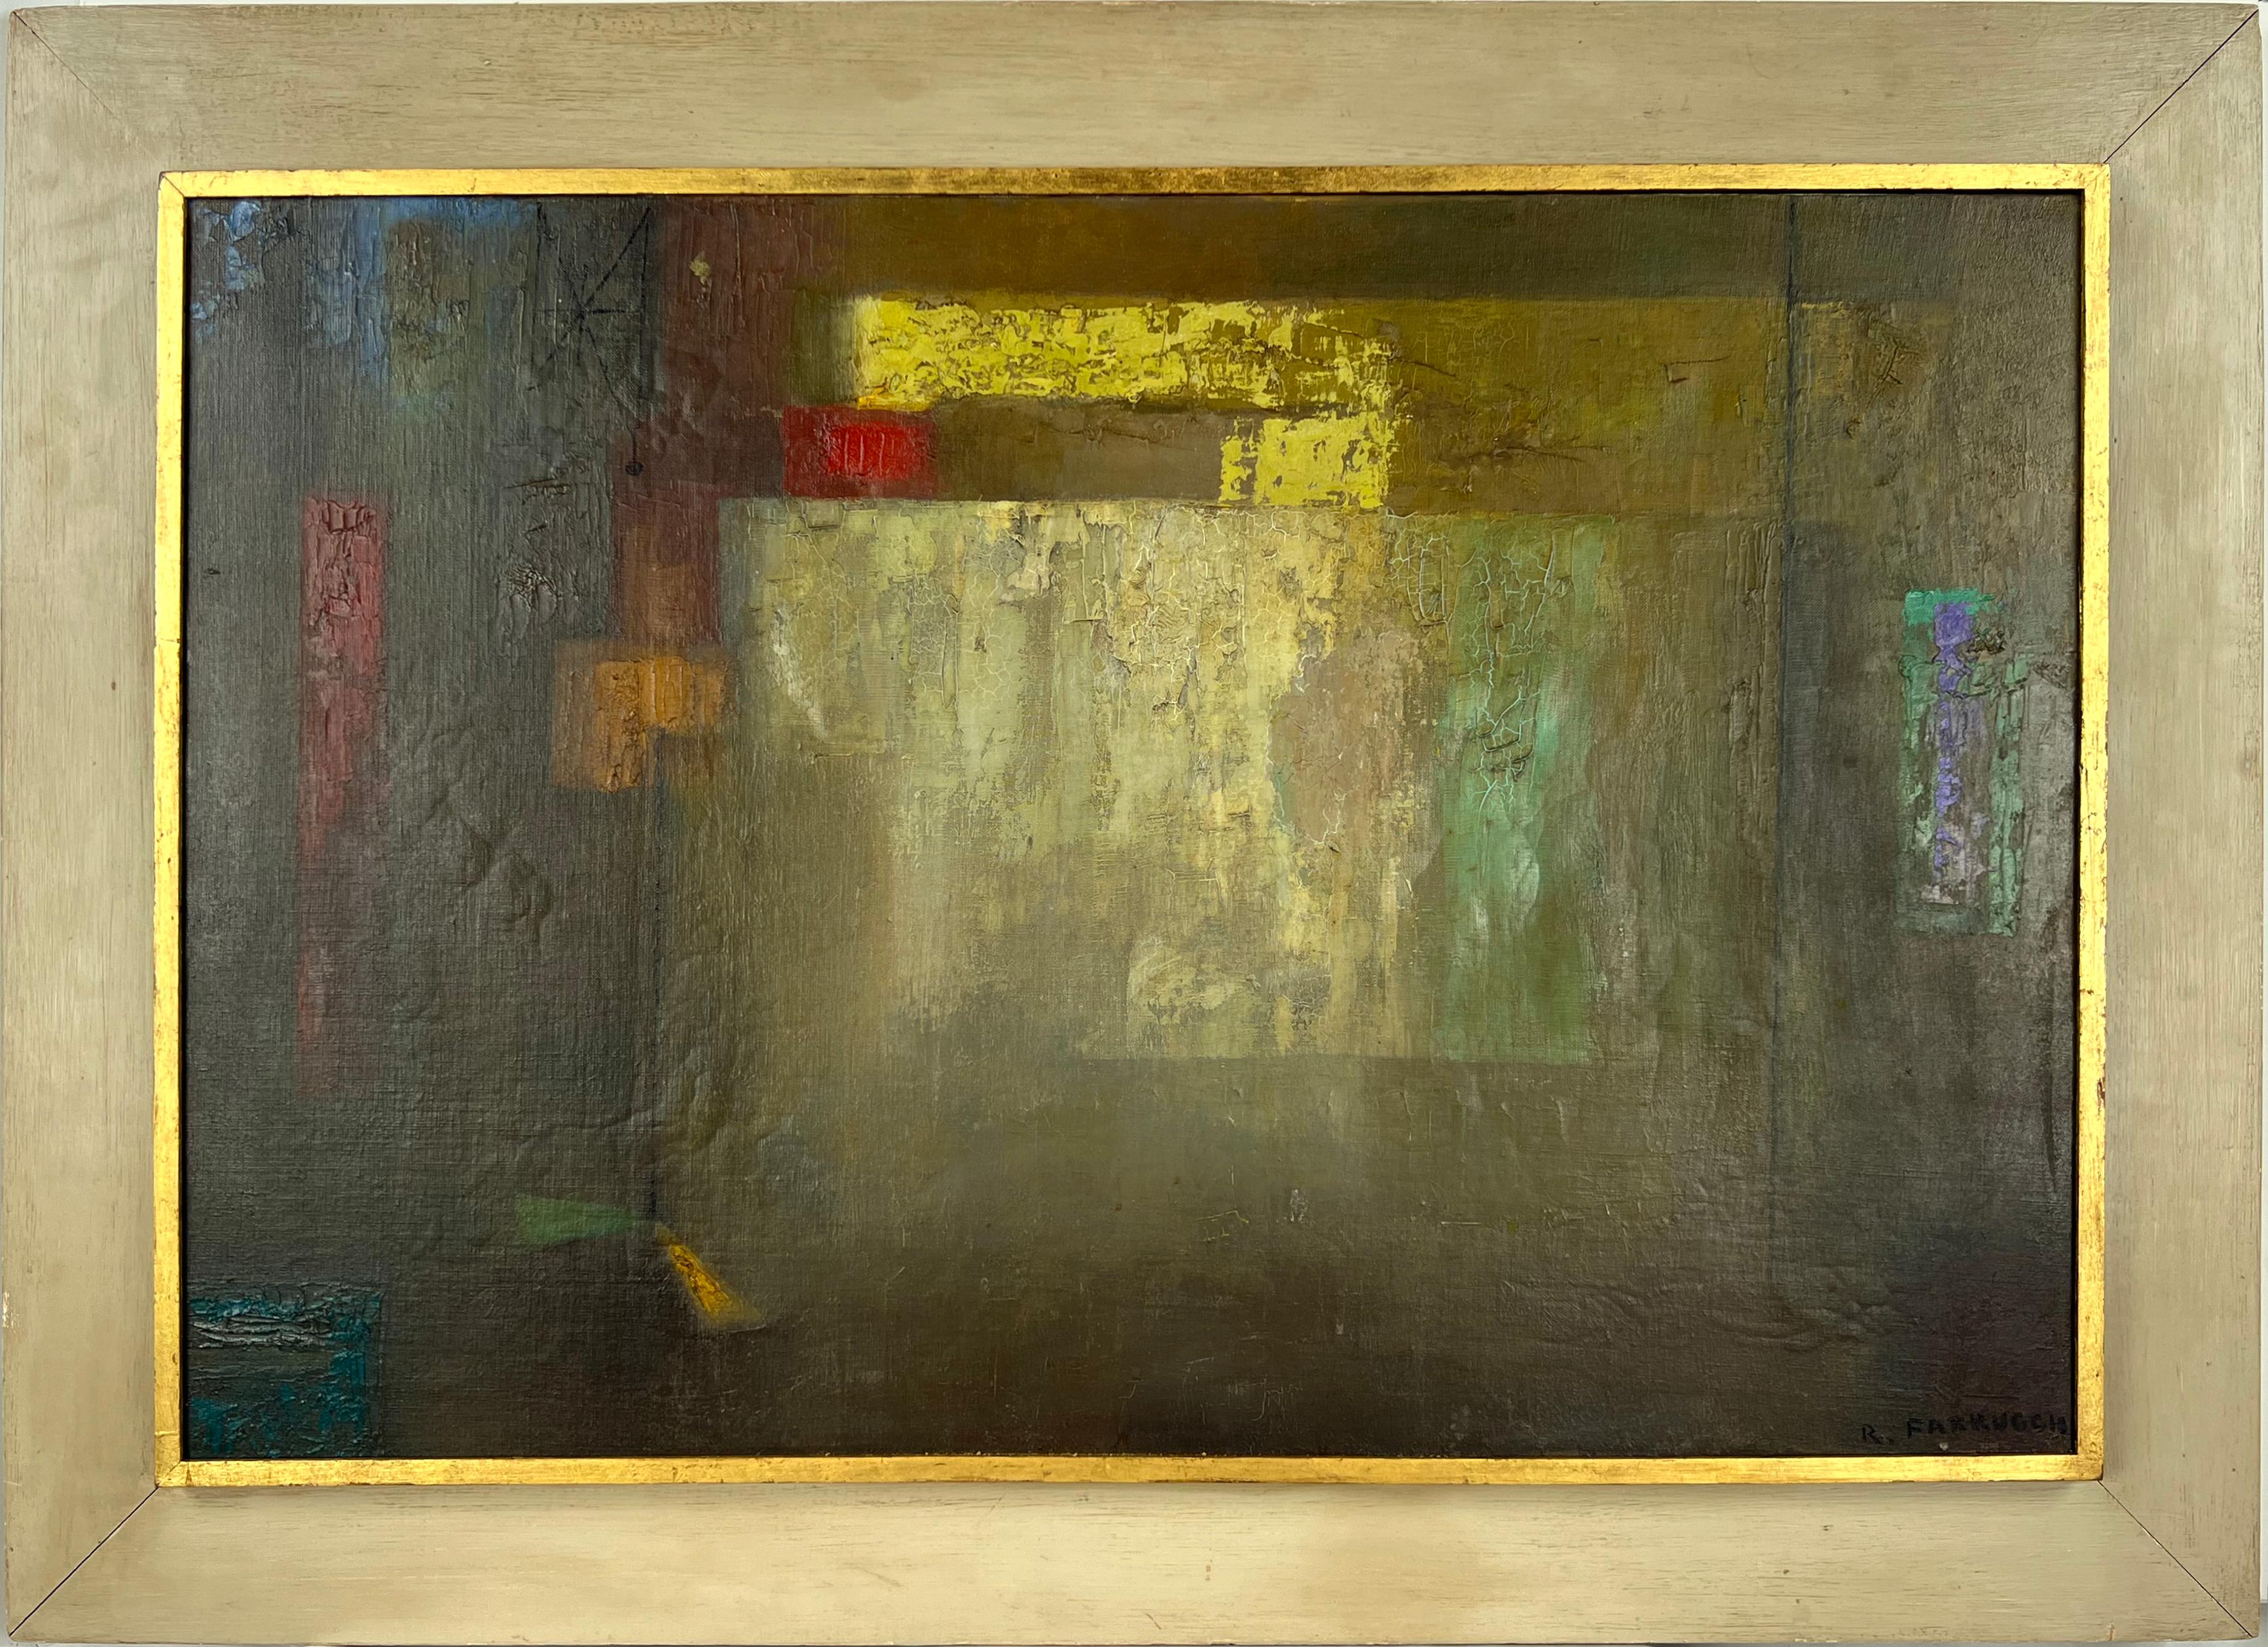 Remo Michael Farruggio Abstract Painting - Abstract Expressionist Geometric Oil on Linen Blocks of Color Diffusion 1967